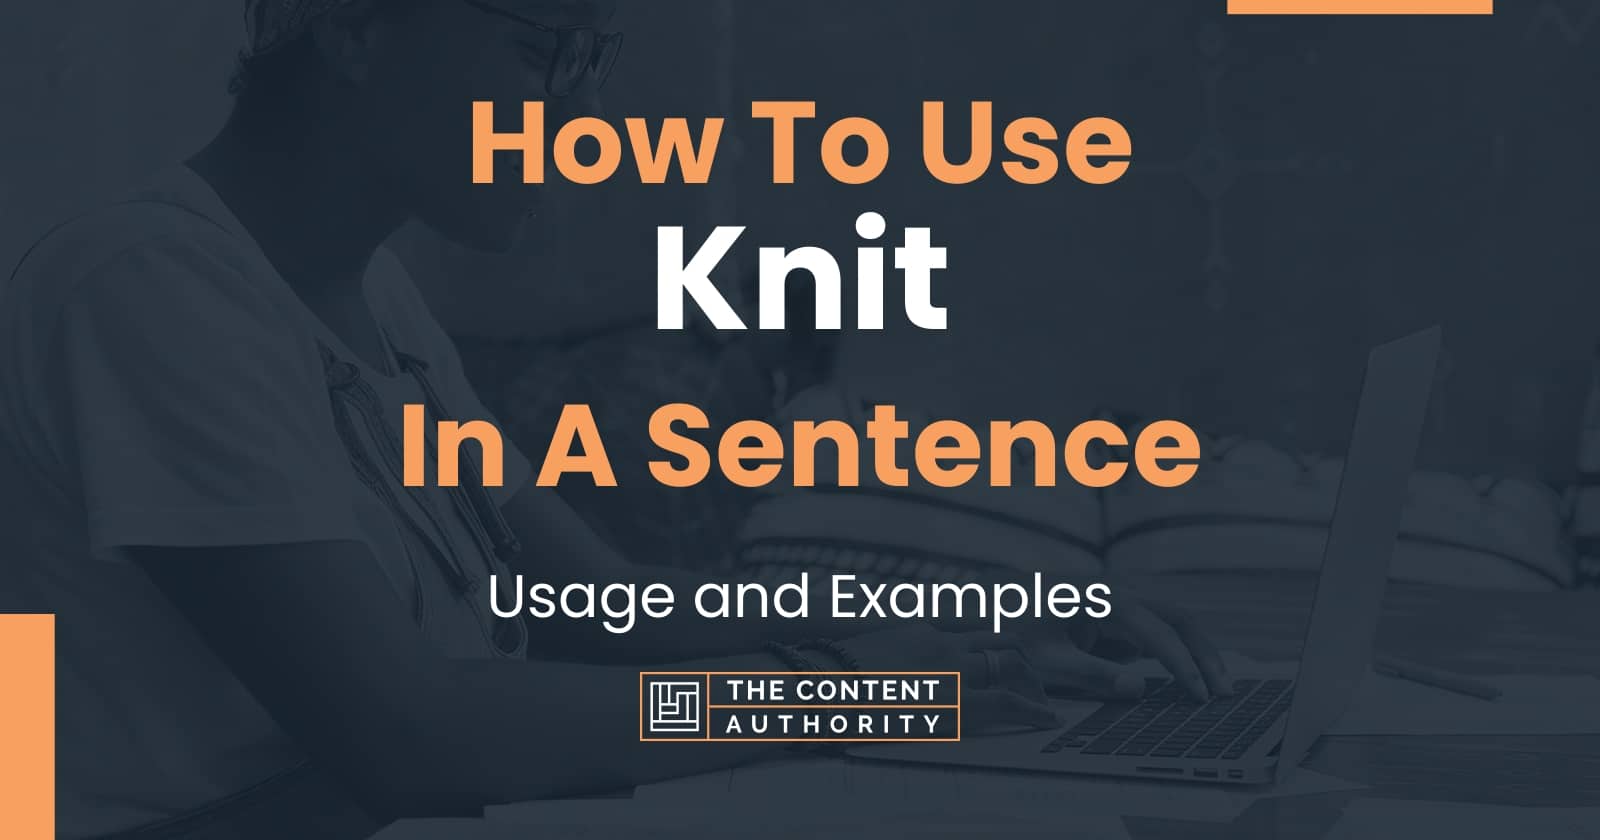 How To Use "Knit" In A Sentence Usage and Examples